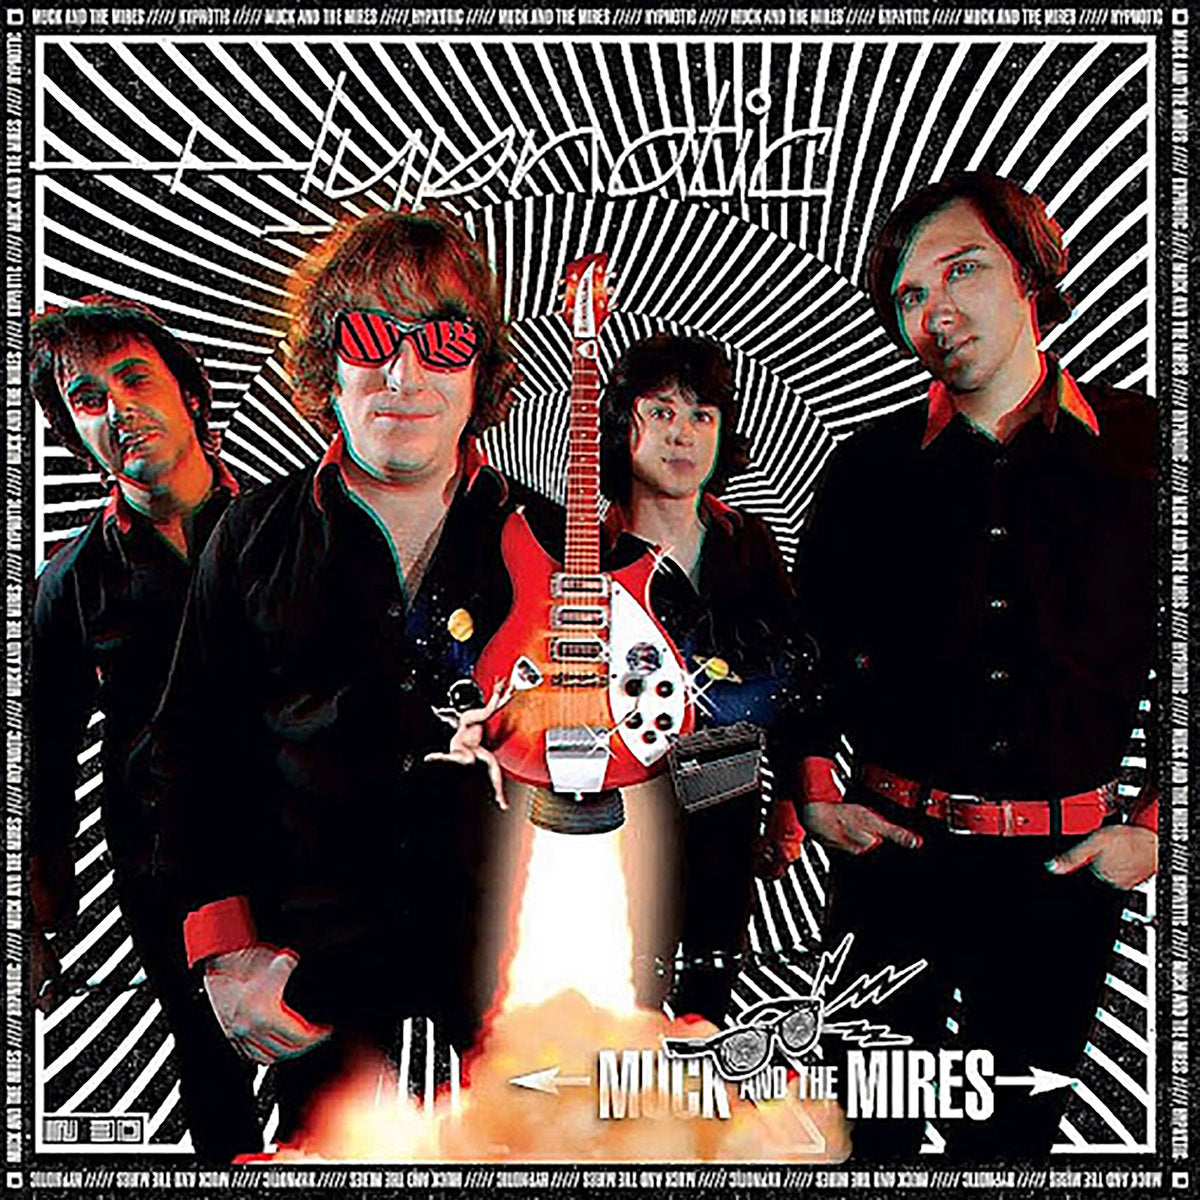 Muck And The Mires- Hypnotic CD ~PRODUCED BY KIM FOWLEY!